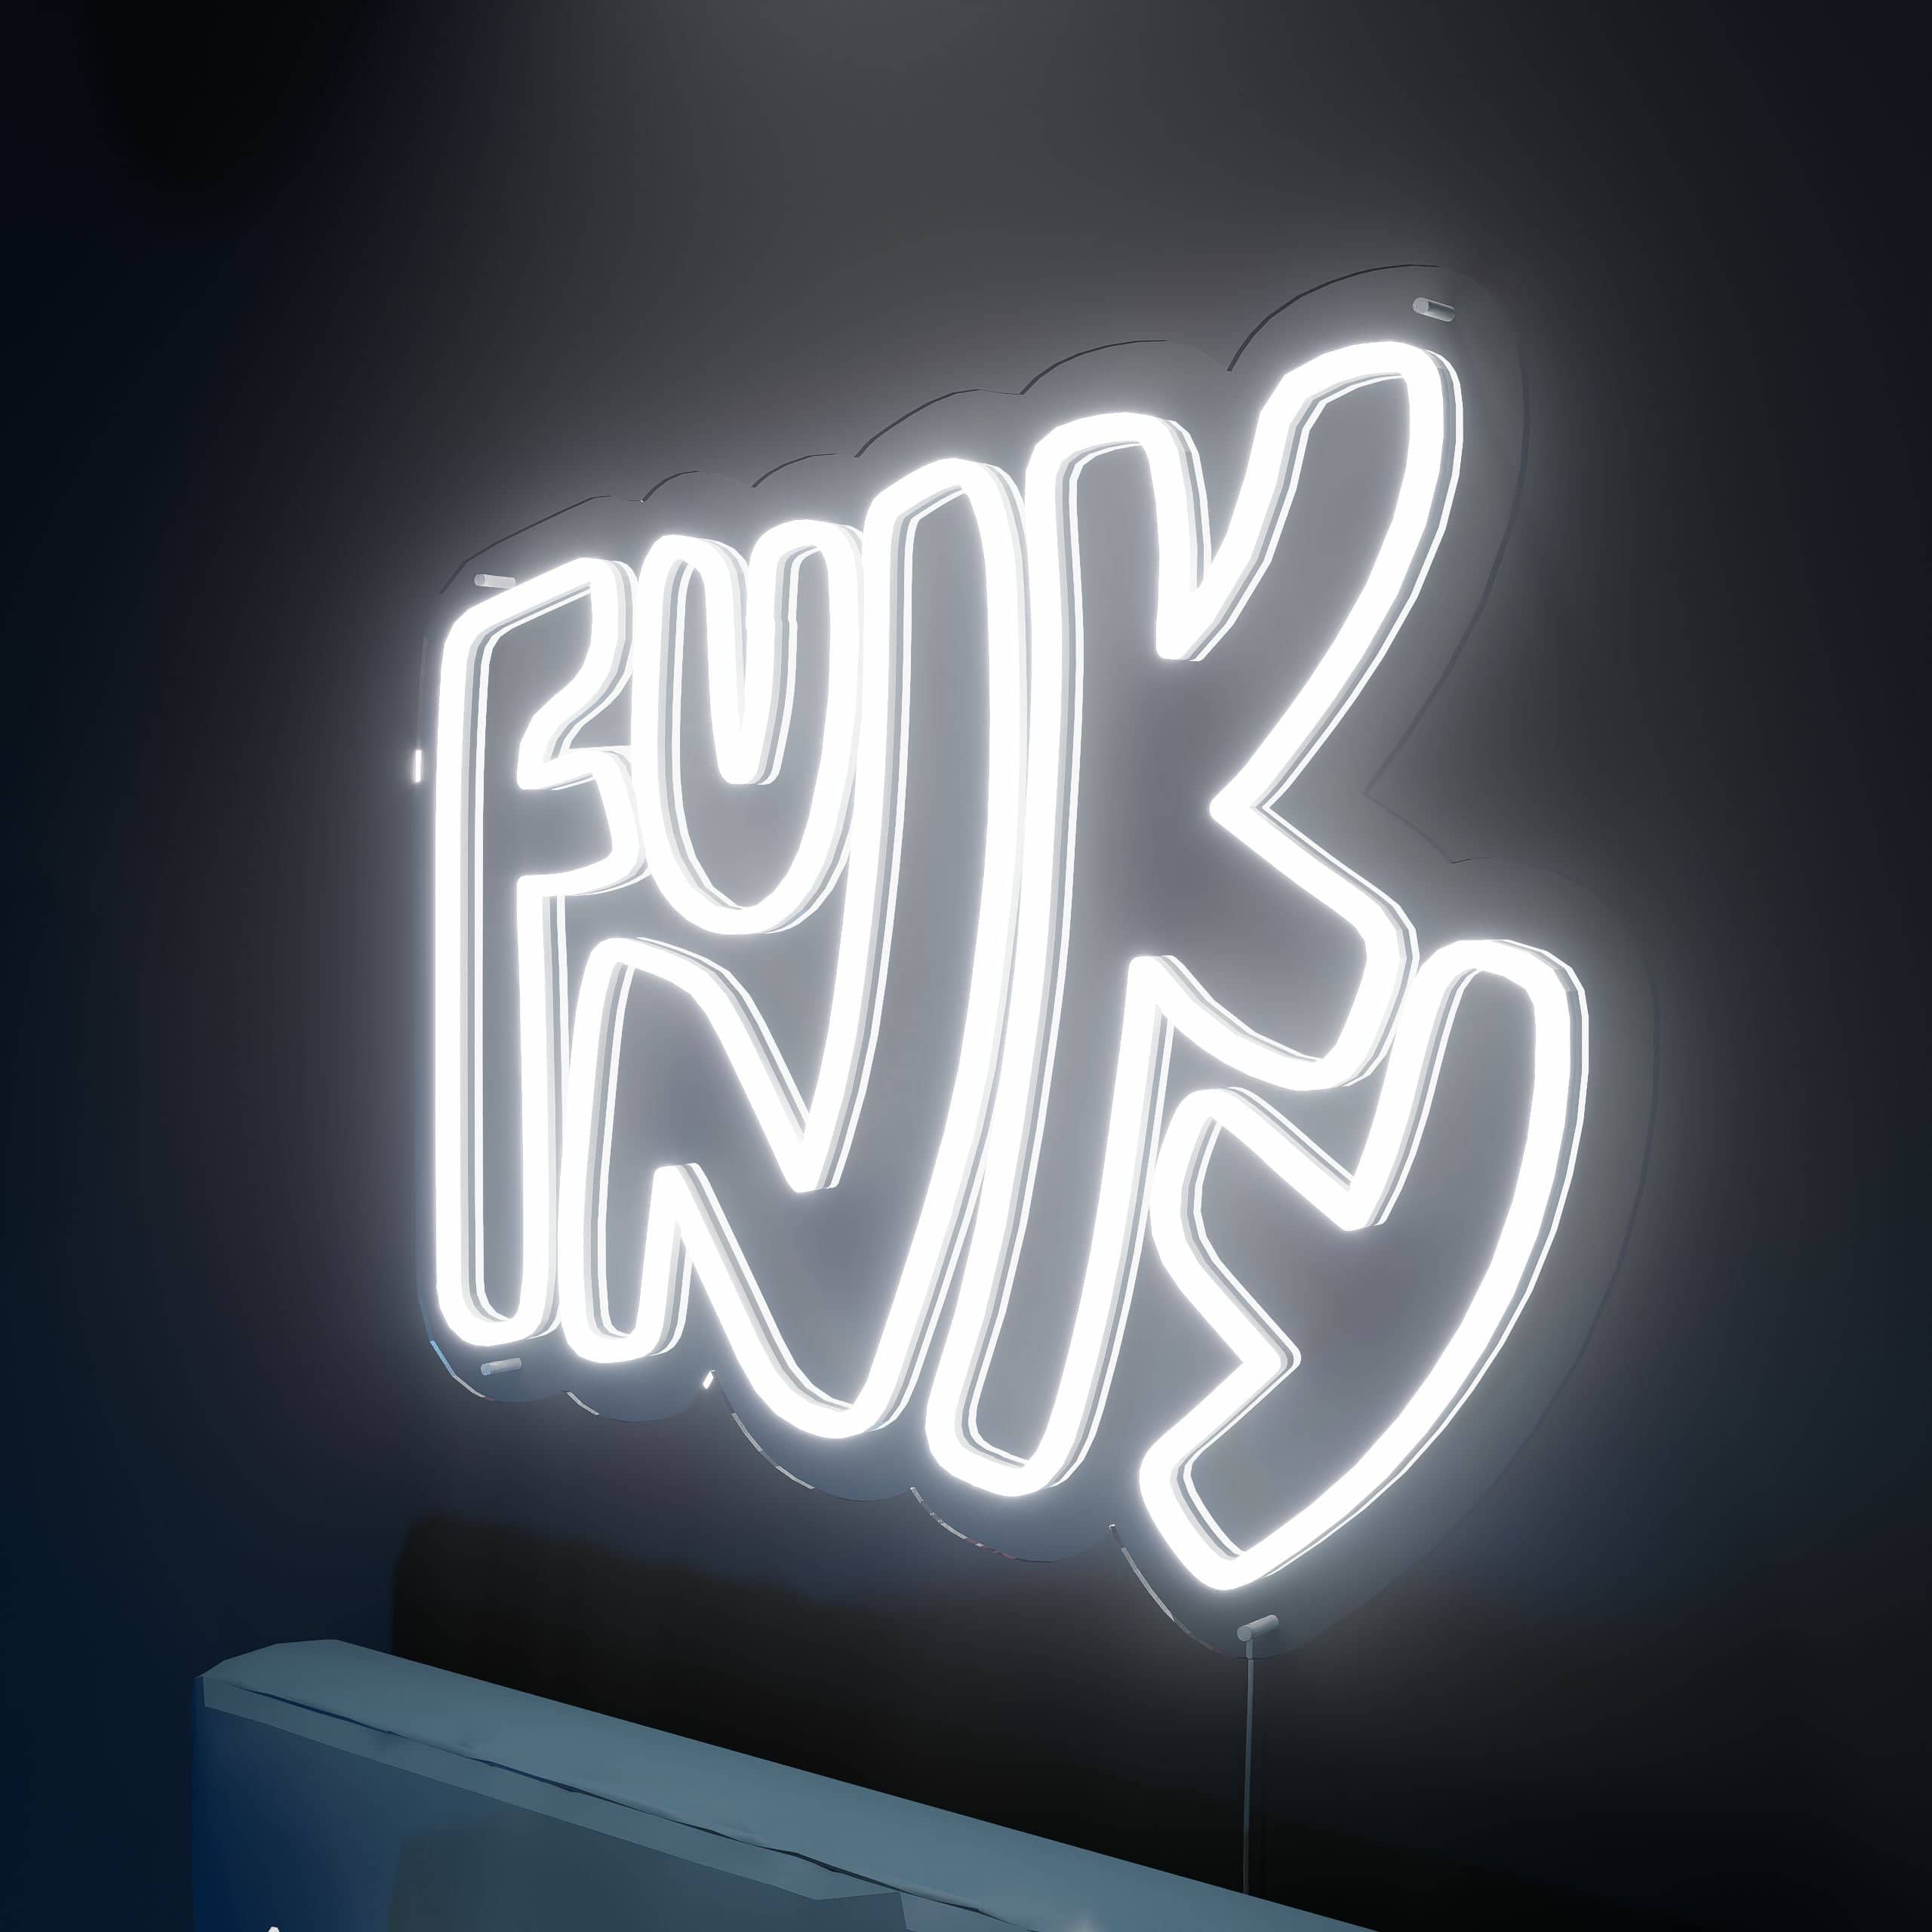 Bright neon sign spells Funky Lifes in style